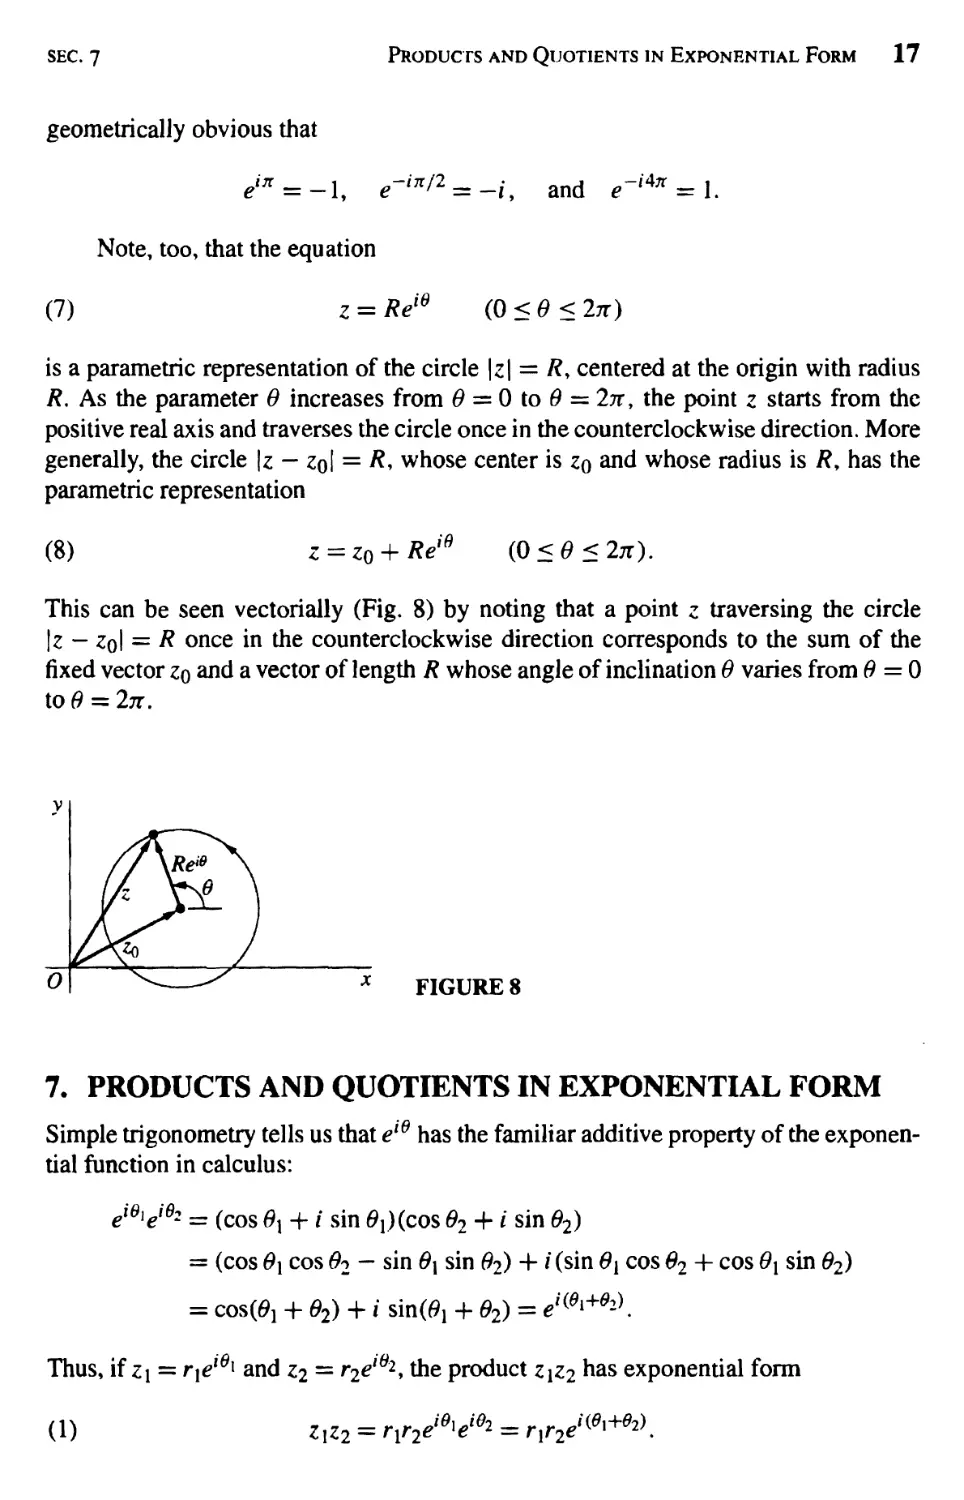 Products and Quotients in Exponential Form